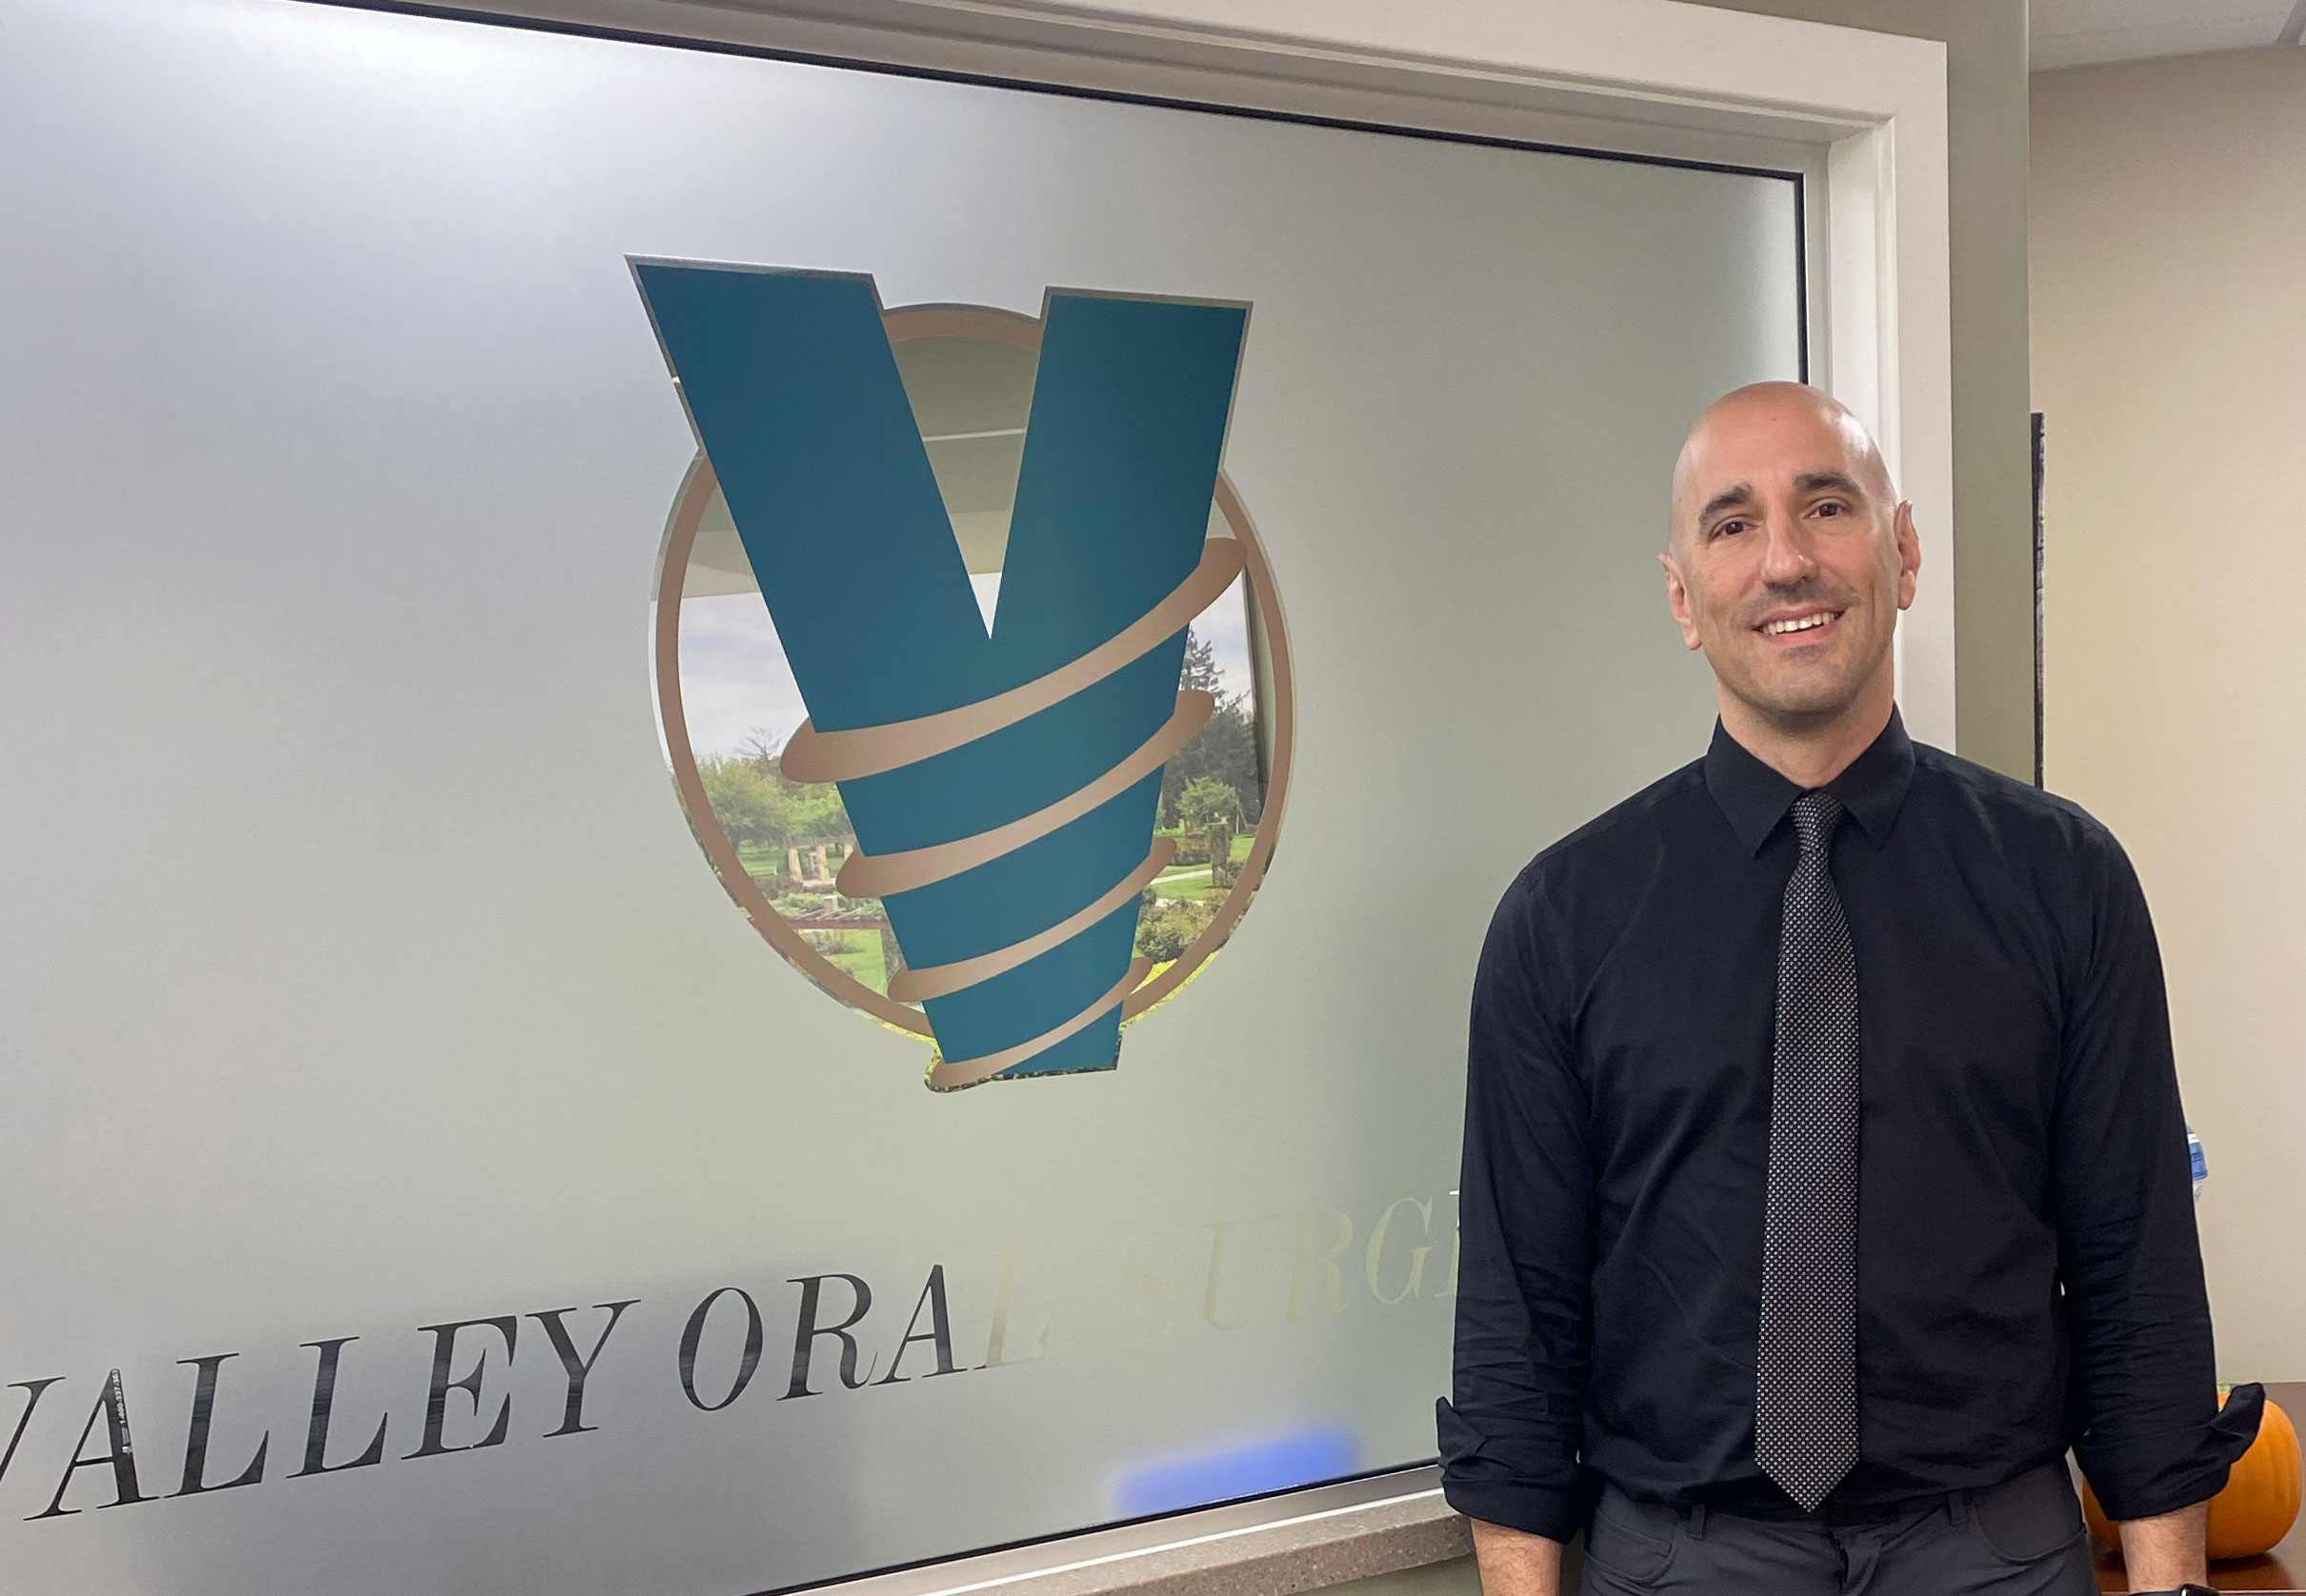 Business Development Manager Ron Palermo at the Valley Oral Surgery Allentown office